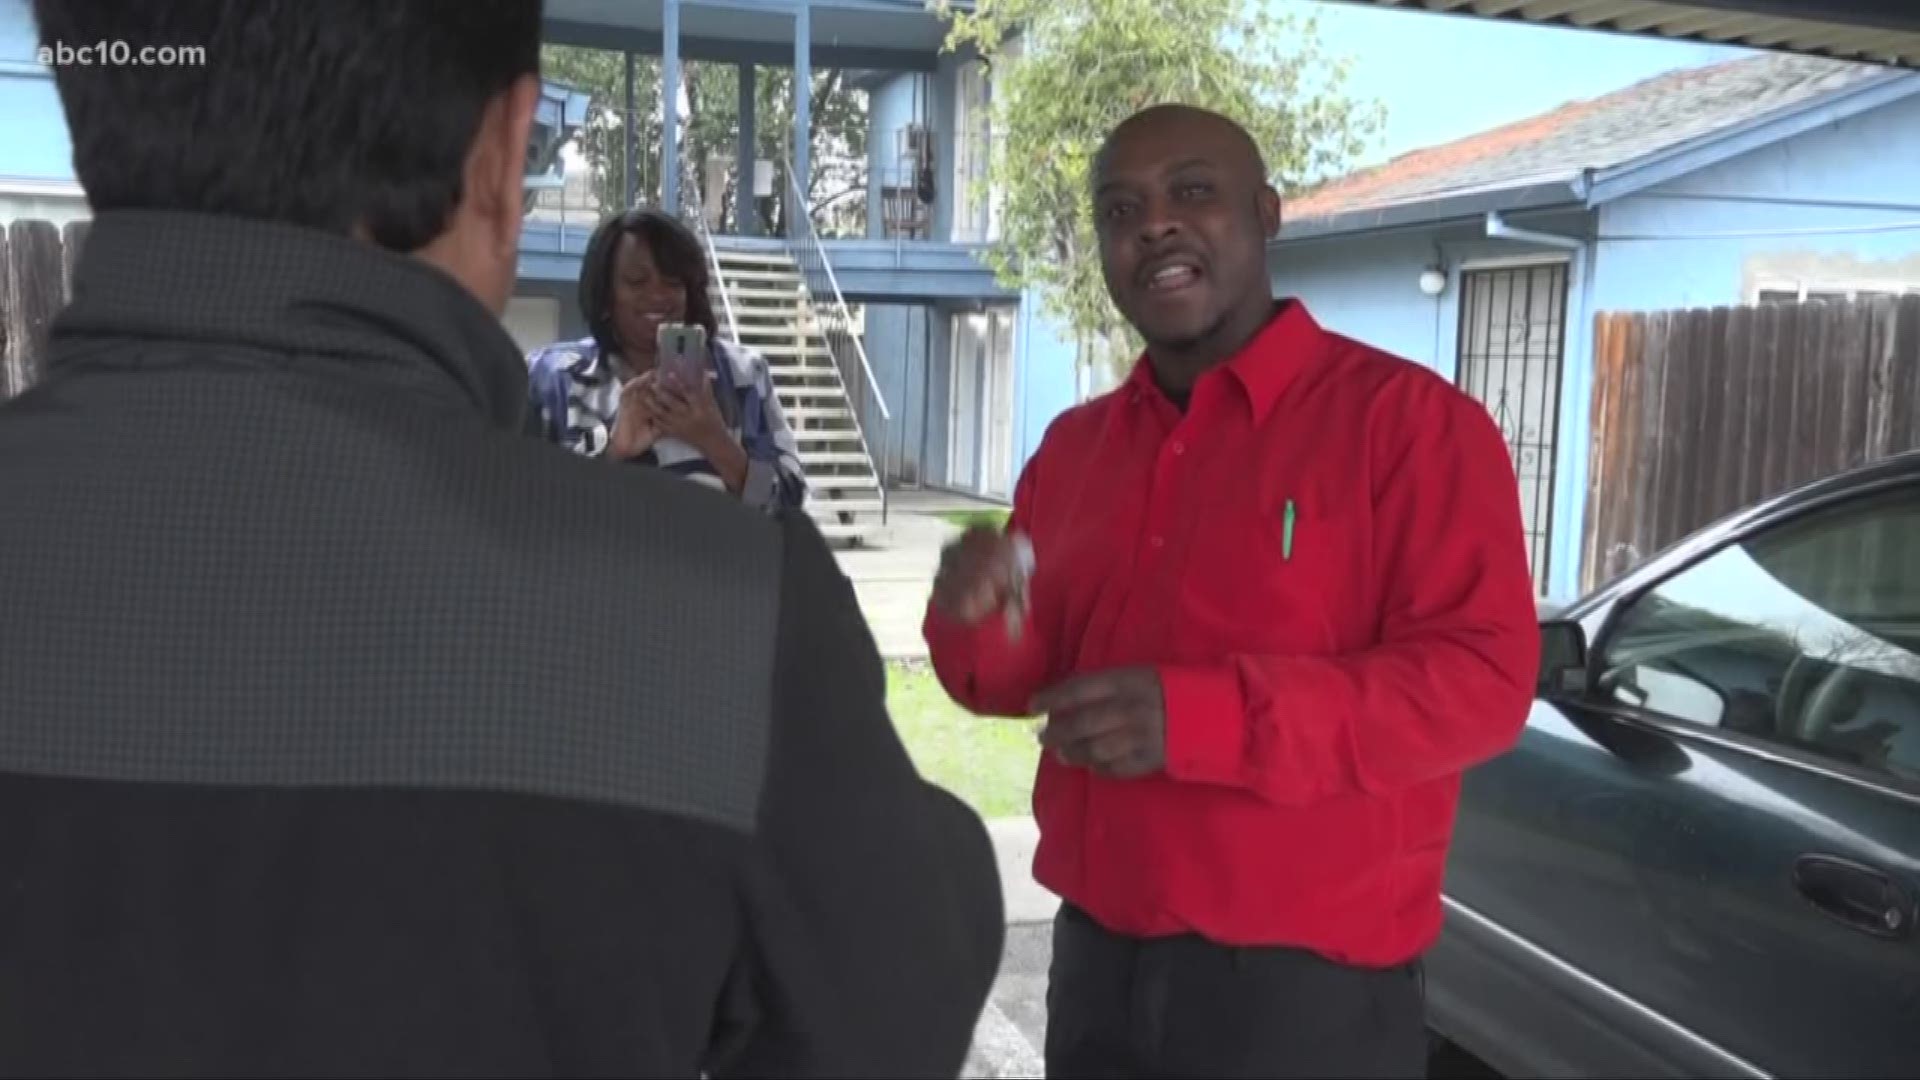 Formerly homeless or incarcerated men can get a new lease on life through the program.